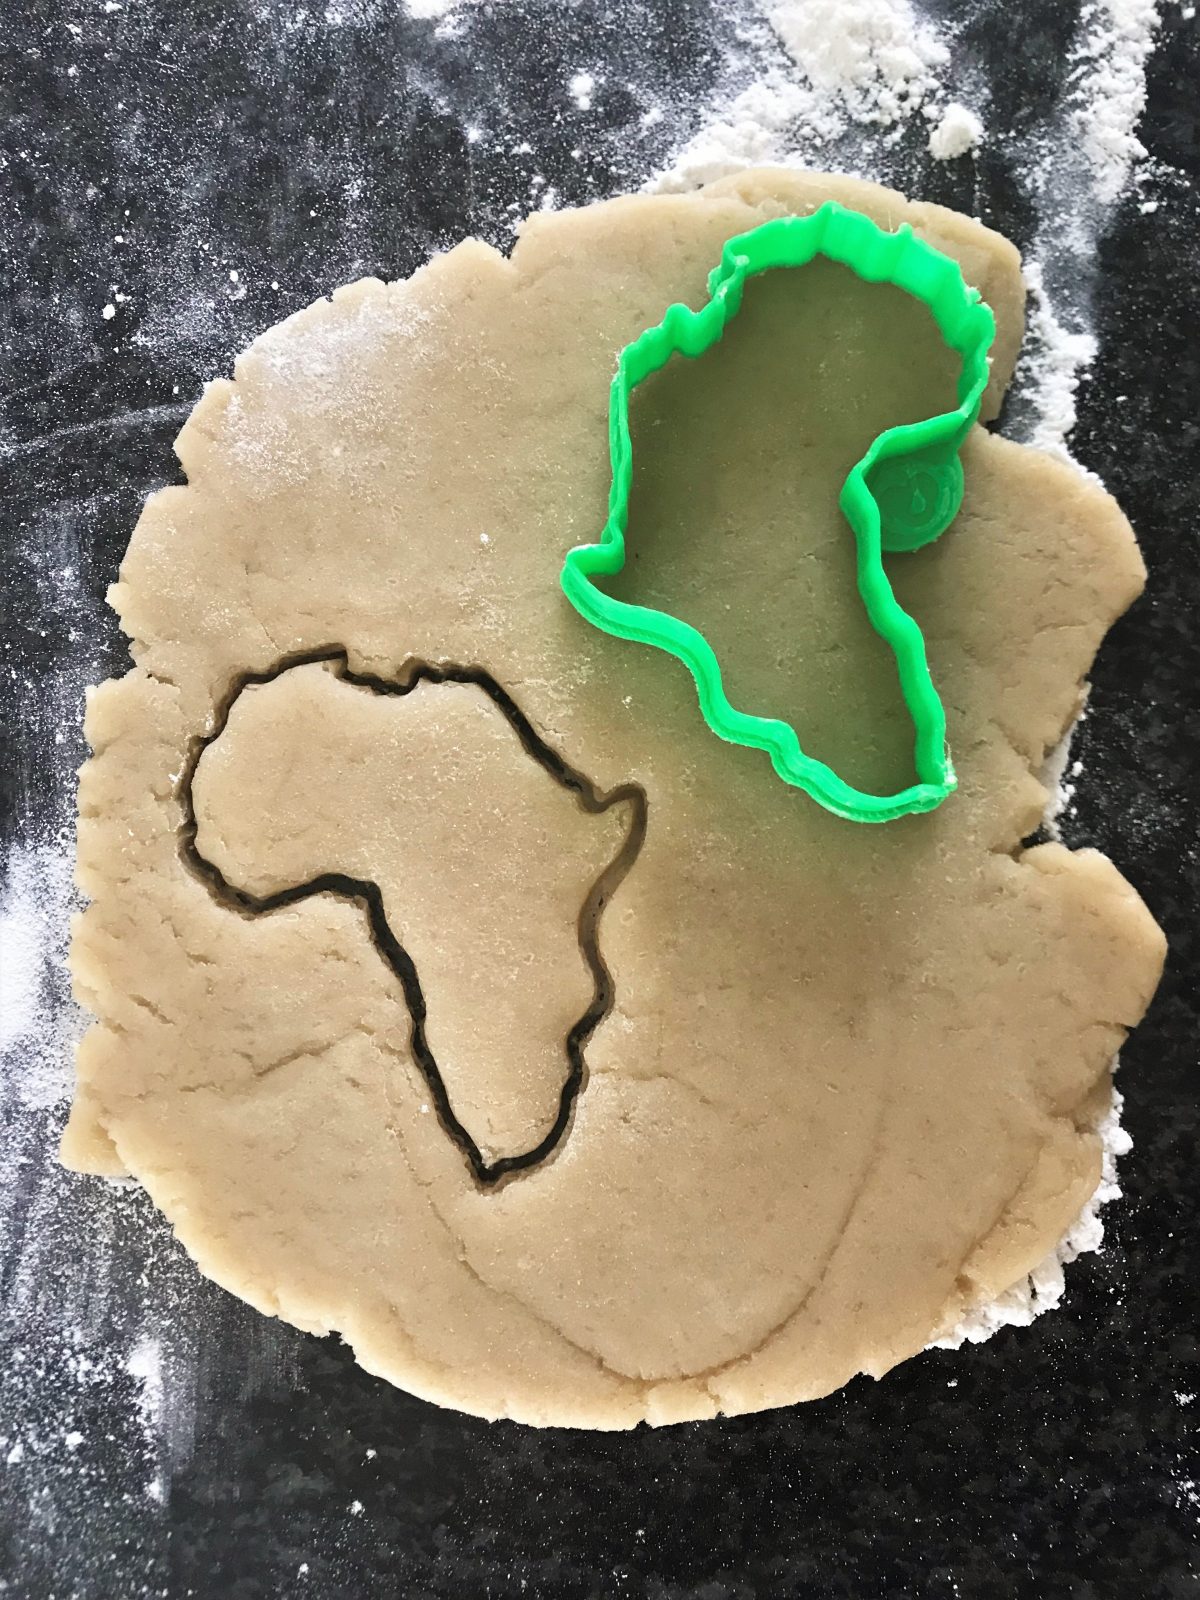 Africa outline cookie cutter on dough